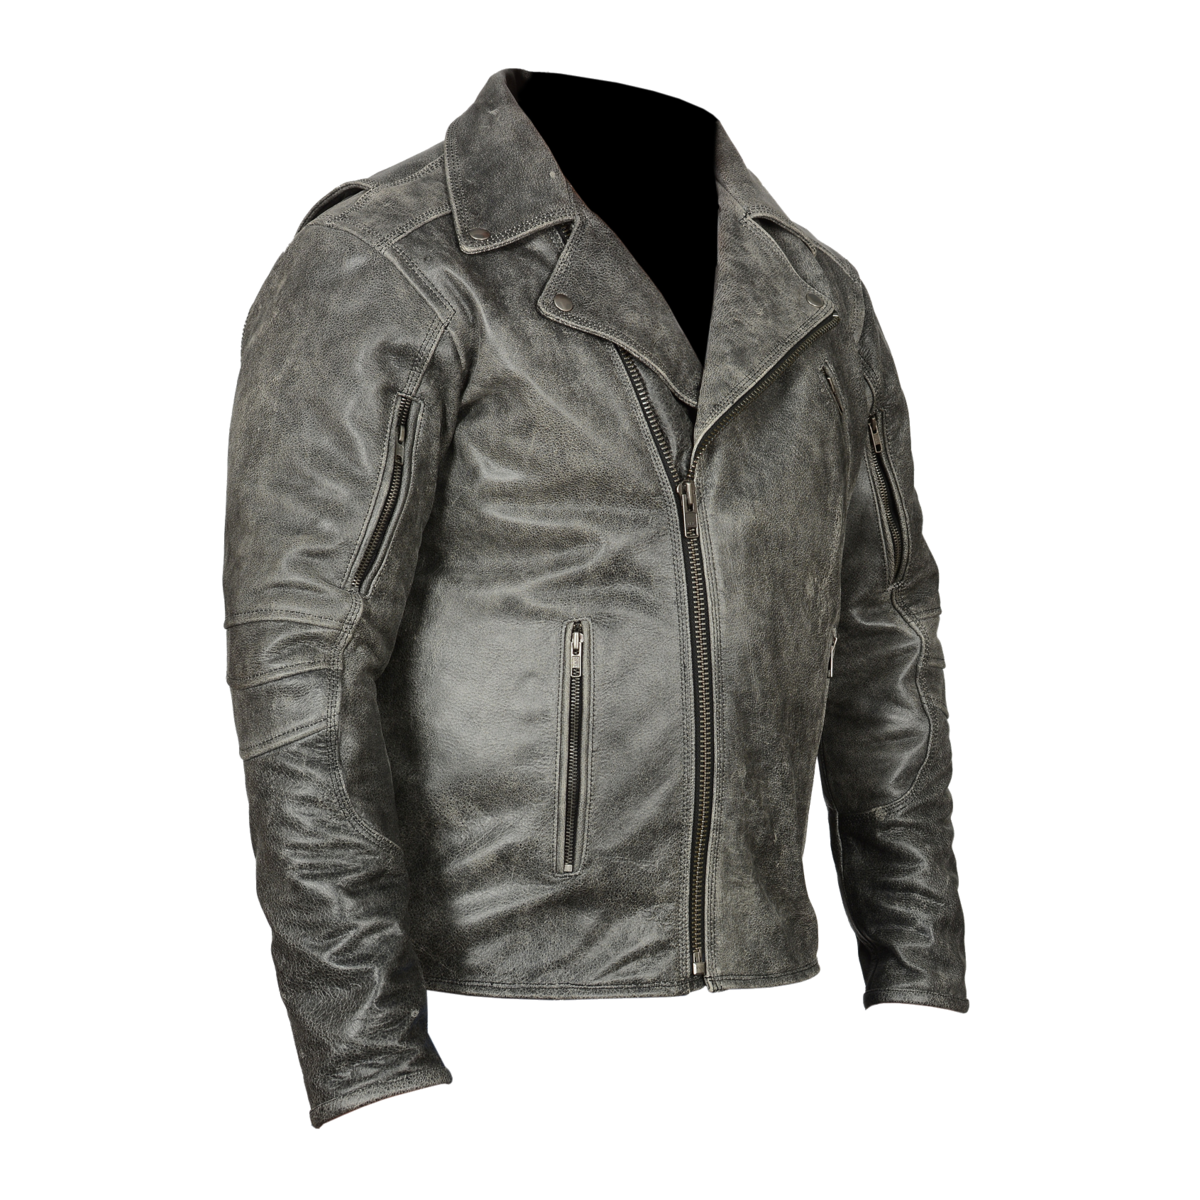 HMM517DG Men's Distressed Gray Leather Racer Jacket with Vents